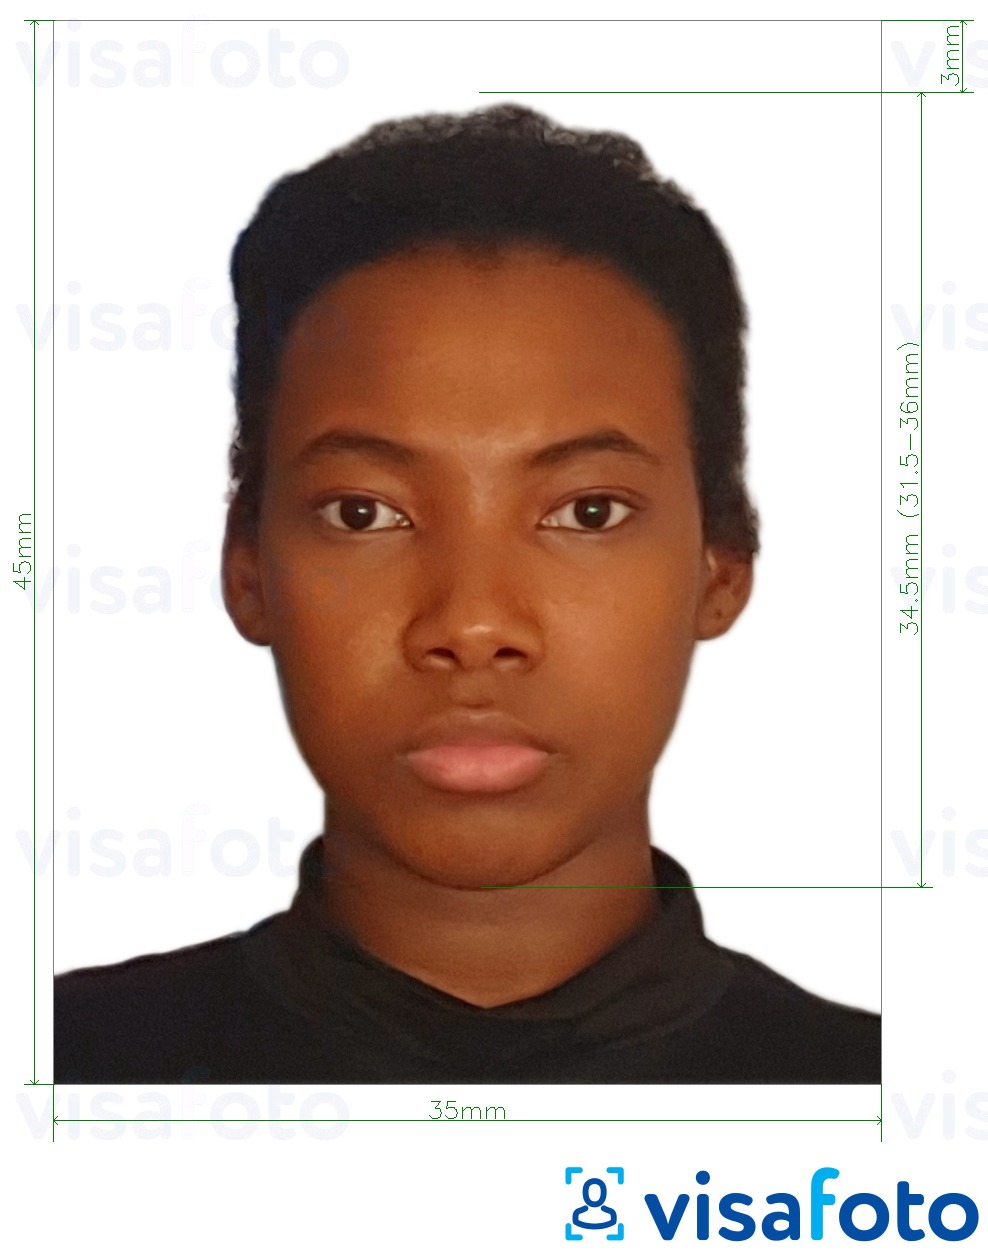 Example of photo for Mozambique visa 35x45 mm (3.5x4.5 cm) with exact size specification